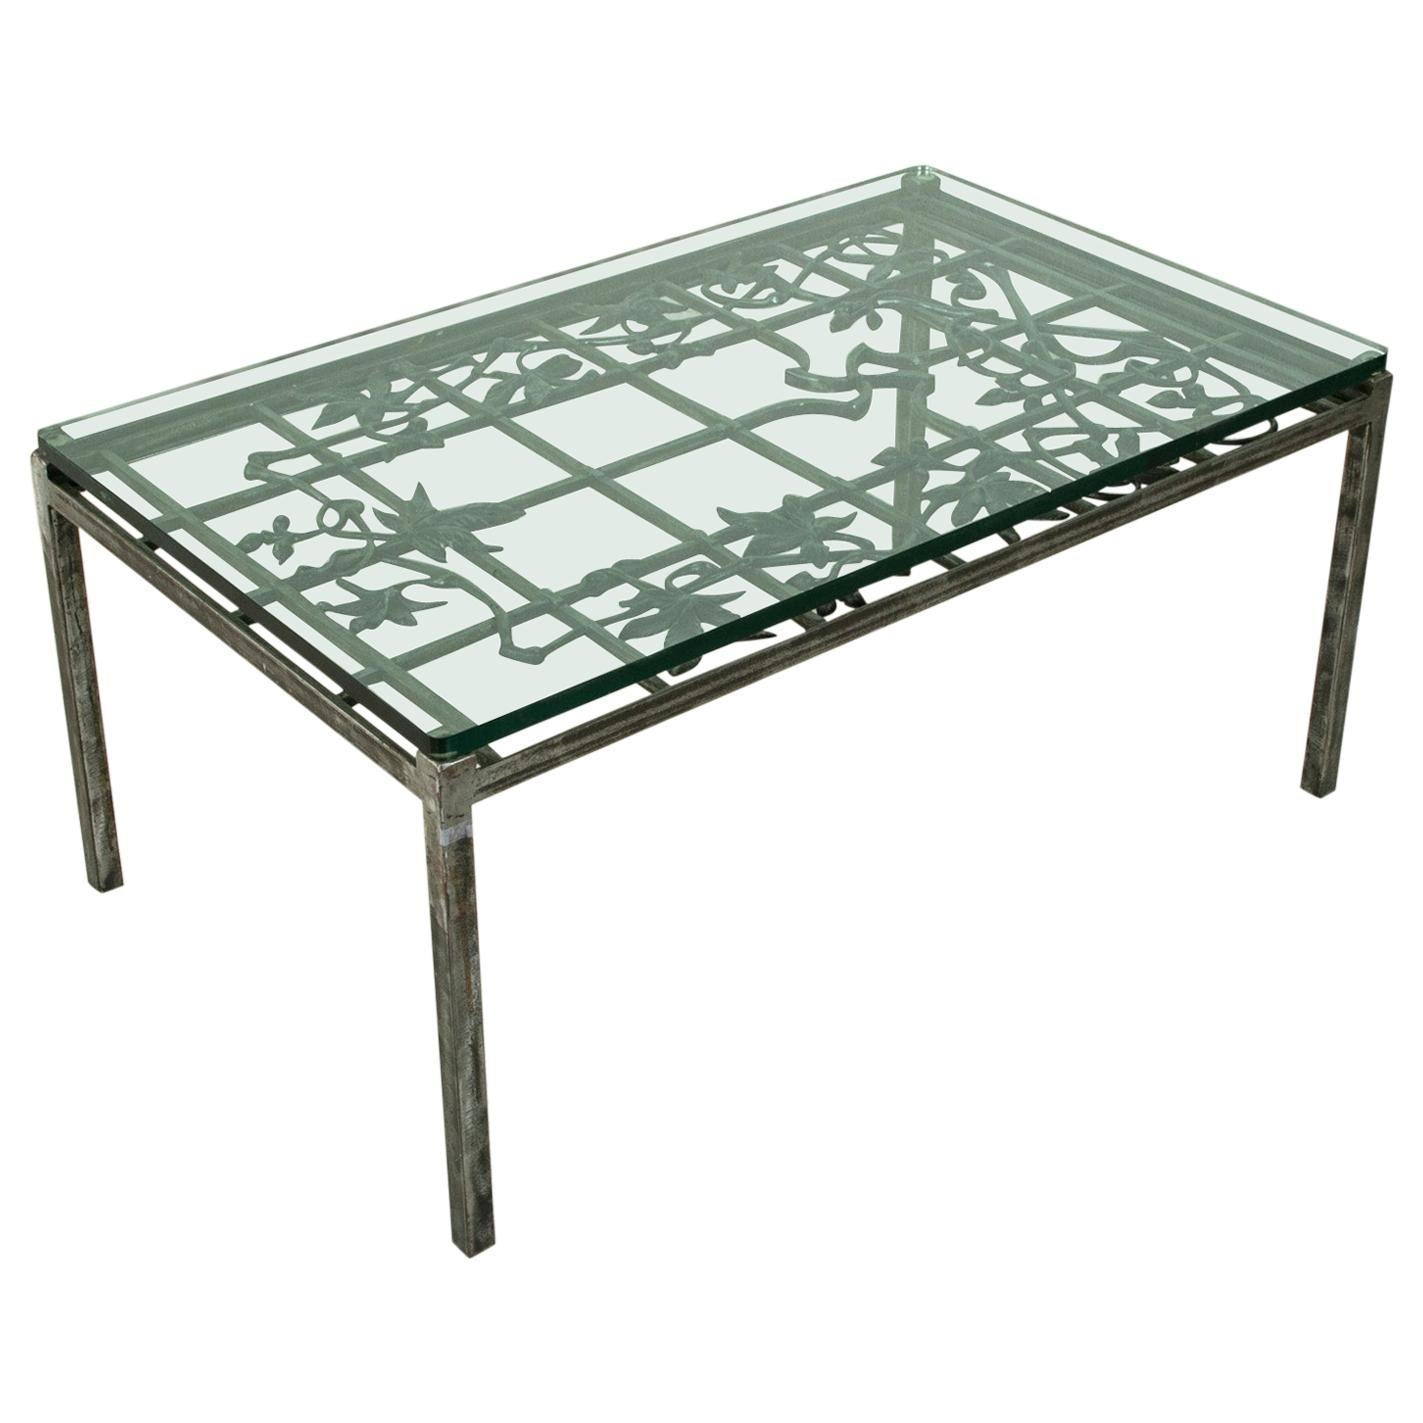 20th Century Iron Coffee Table Made with French Art Nouveau Period Balcony Grill